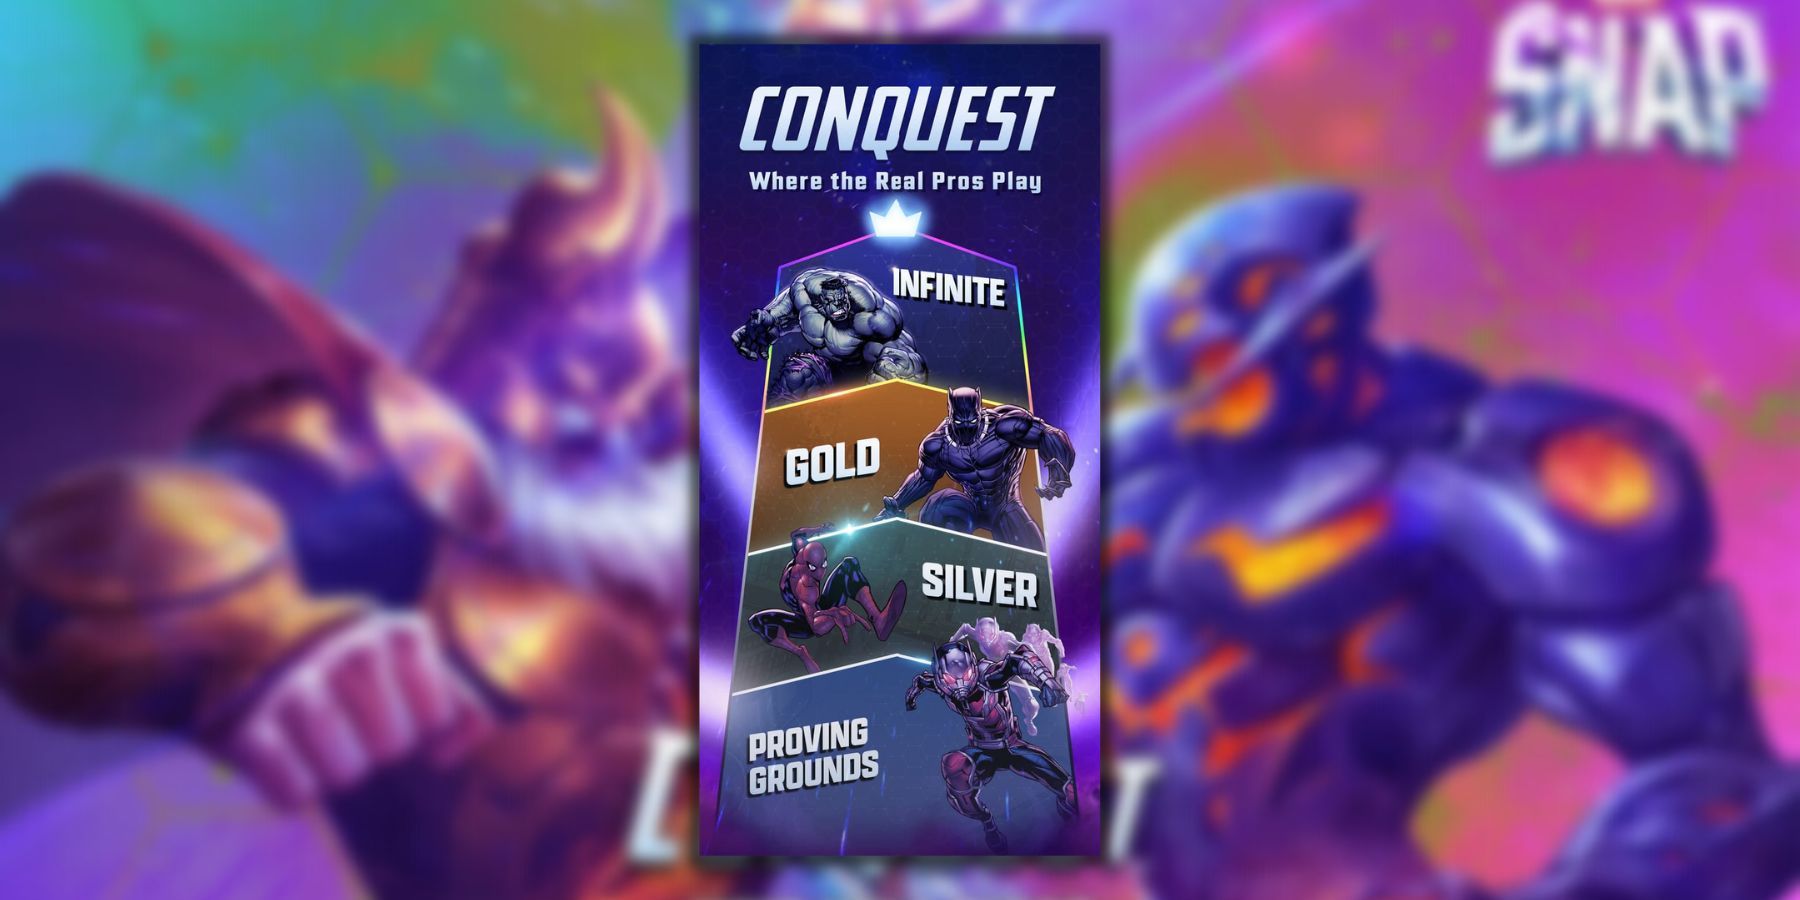 Marvel Snap Conquest Decks Guide: Best Deck For the New Mode